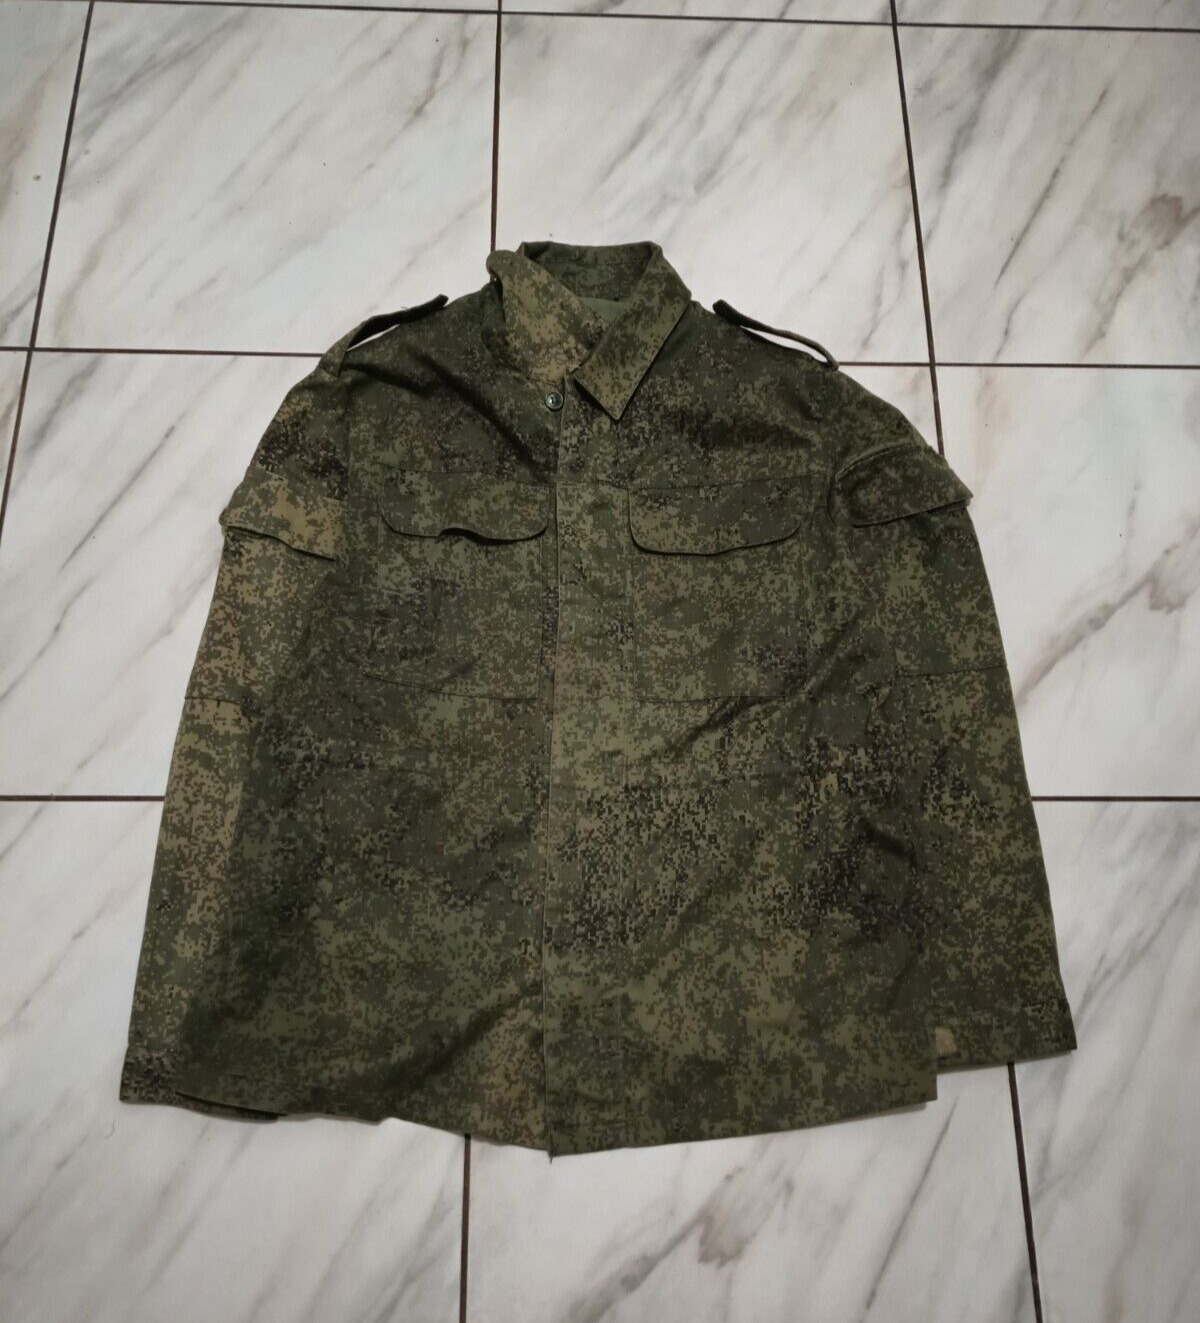 russian army uniform, jacket  good condition(washed)